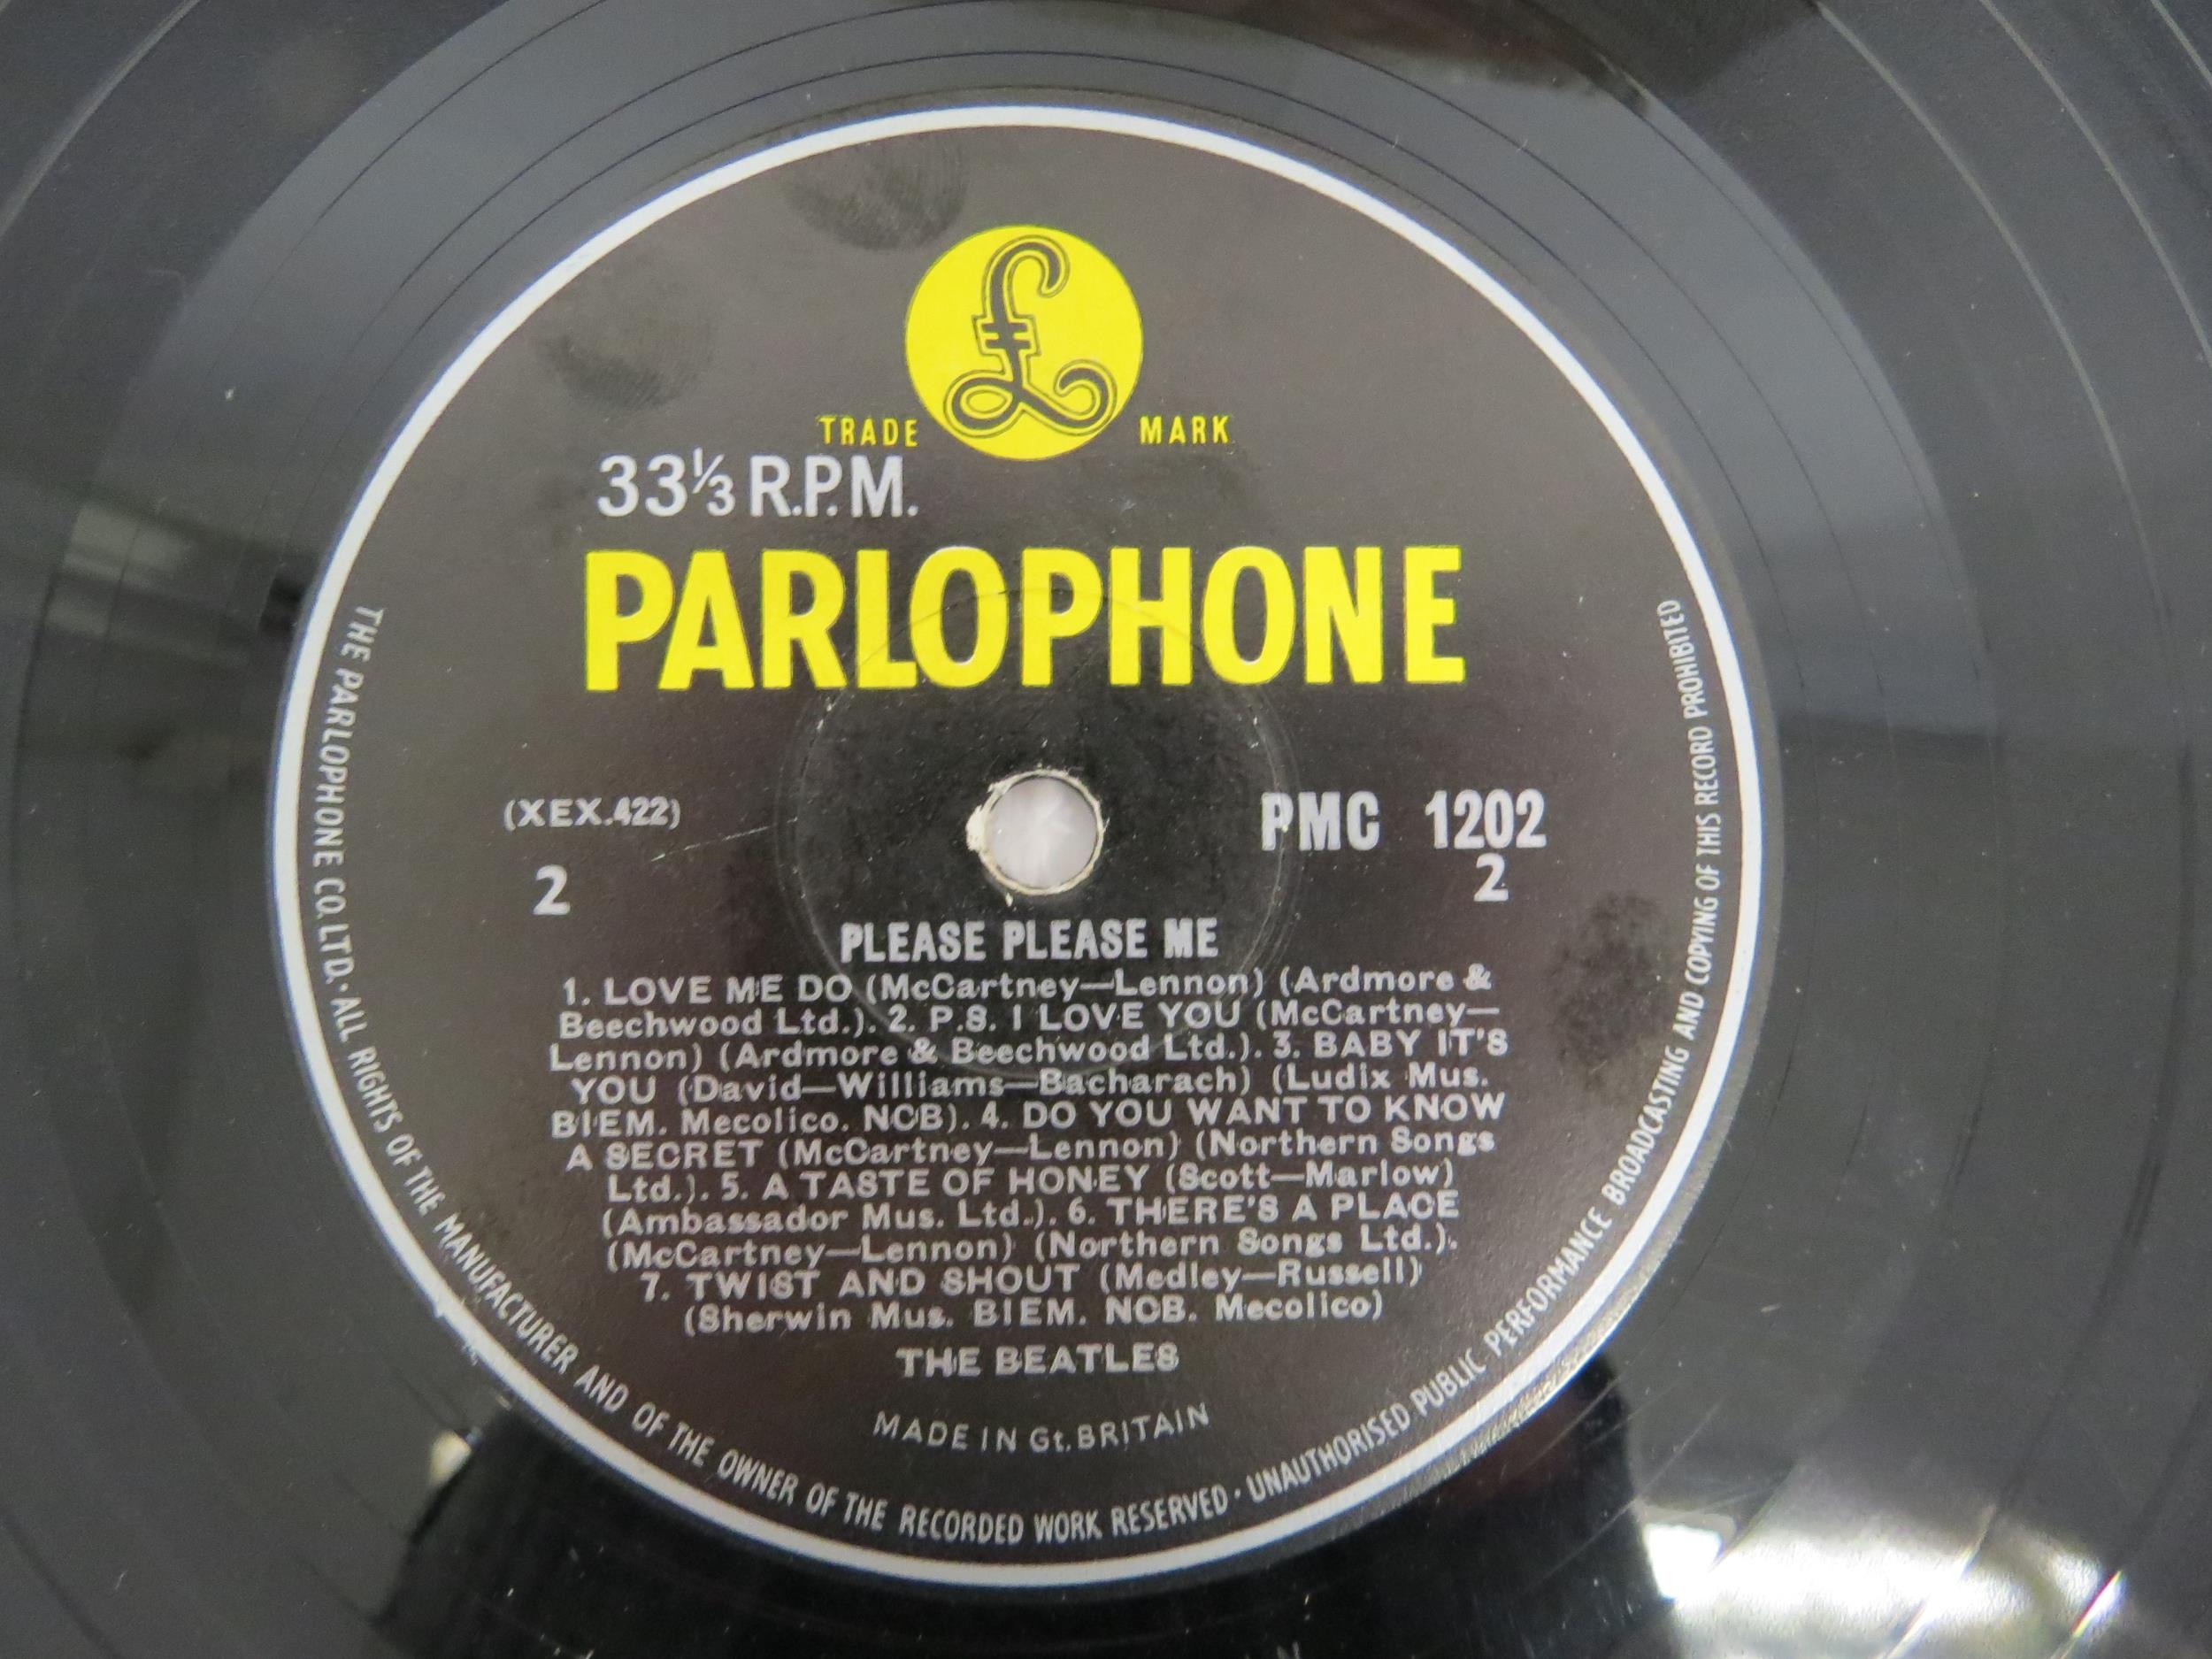 THE BEATLES: 'Please Please Me' LP, hard to find third UK mono pressing, yellow and black Parlophone - Image 3 of 7